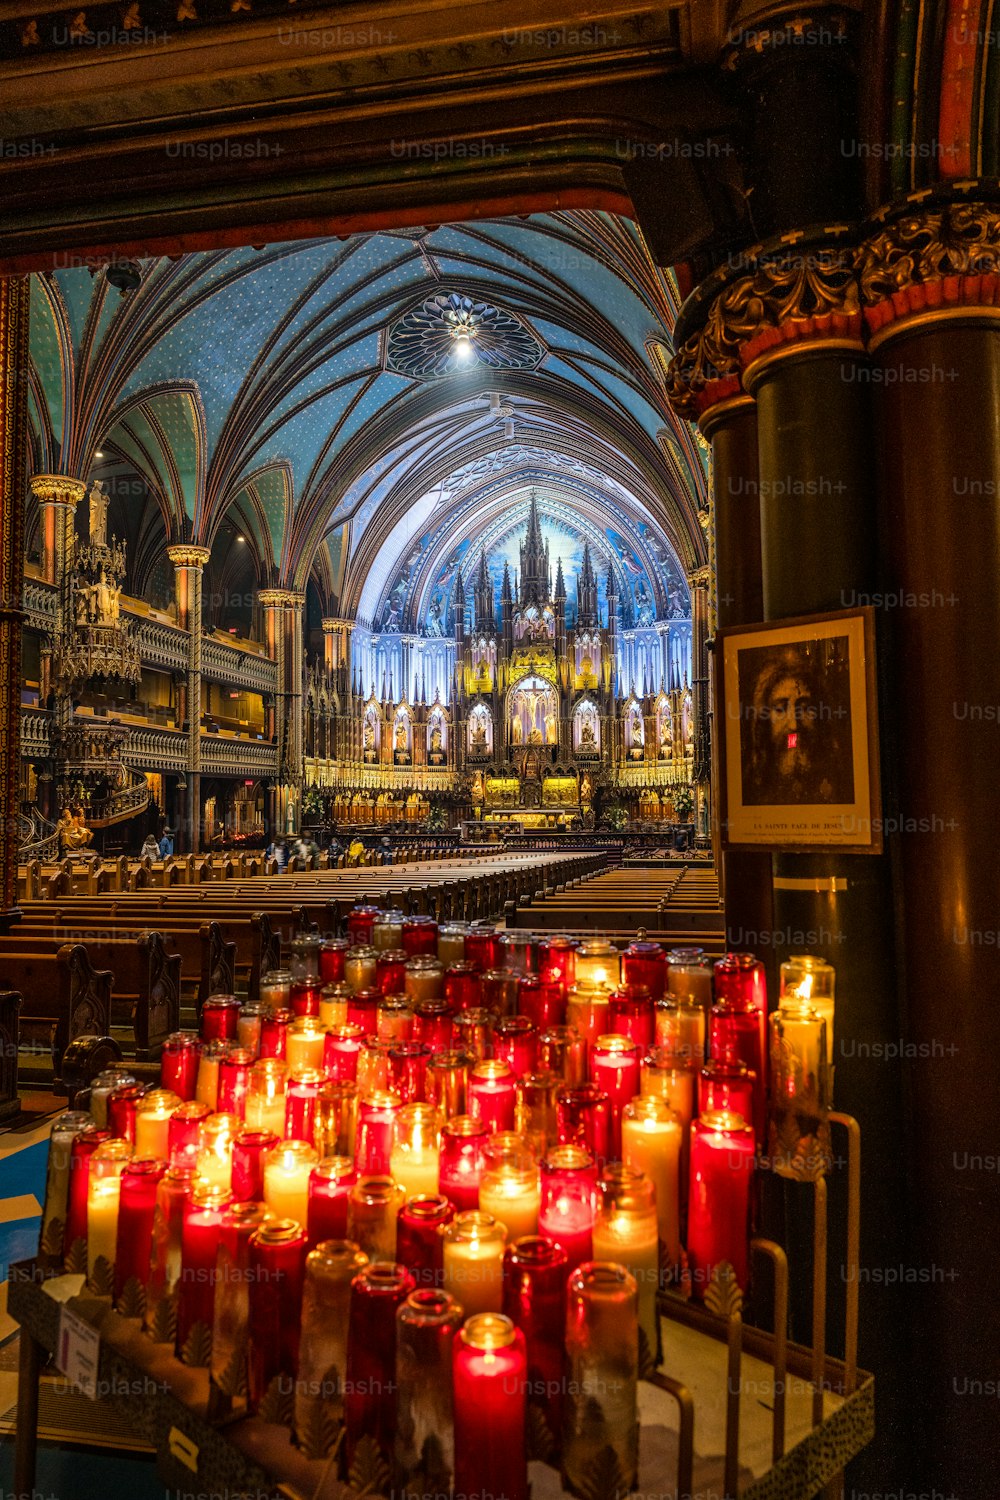 A peaceful scene with candles burning in Montreal Notre-Dame Basilica, Canada